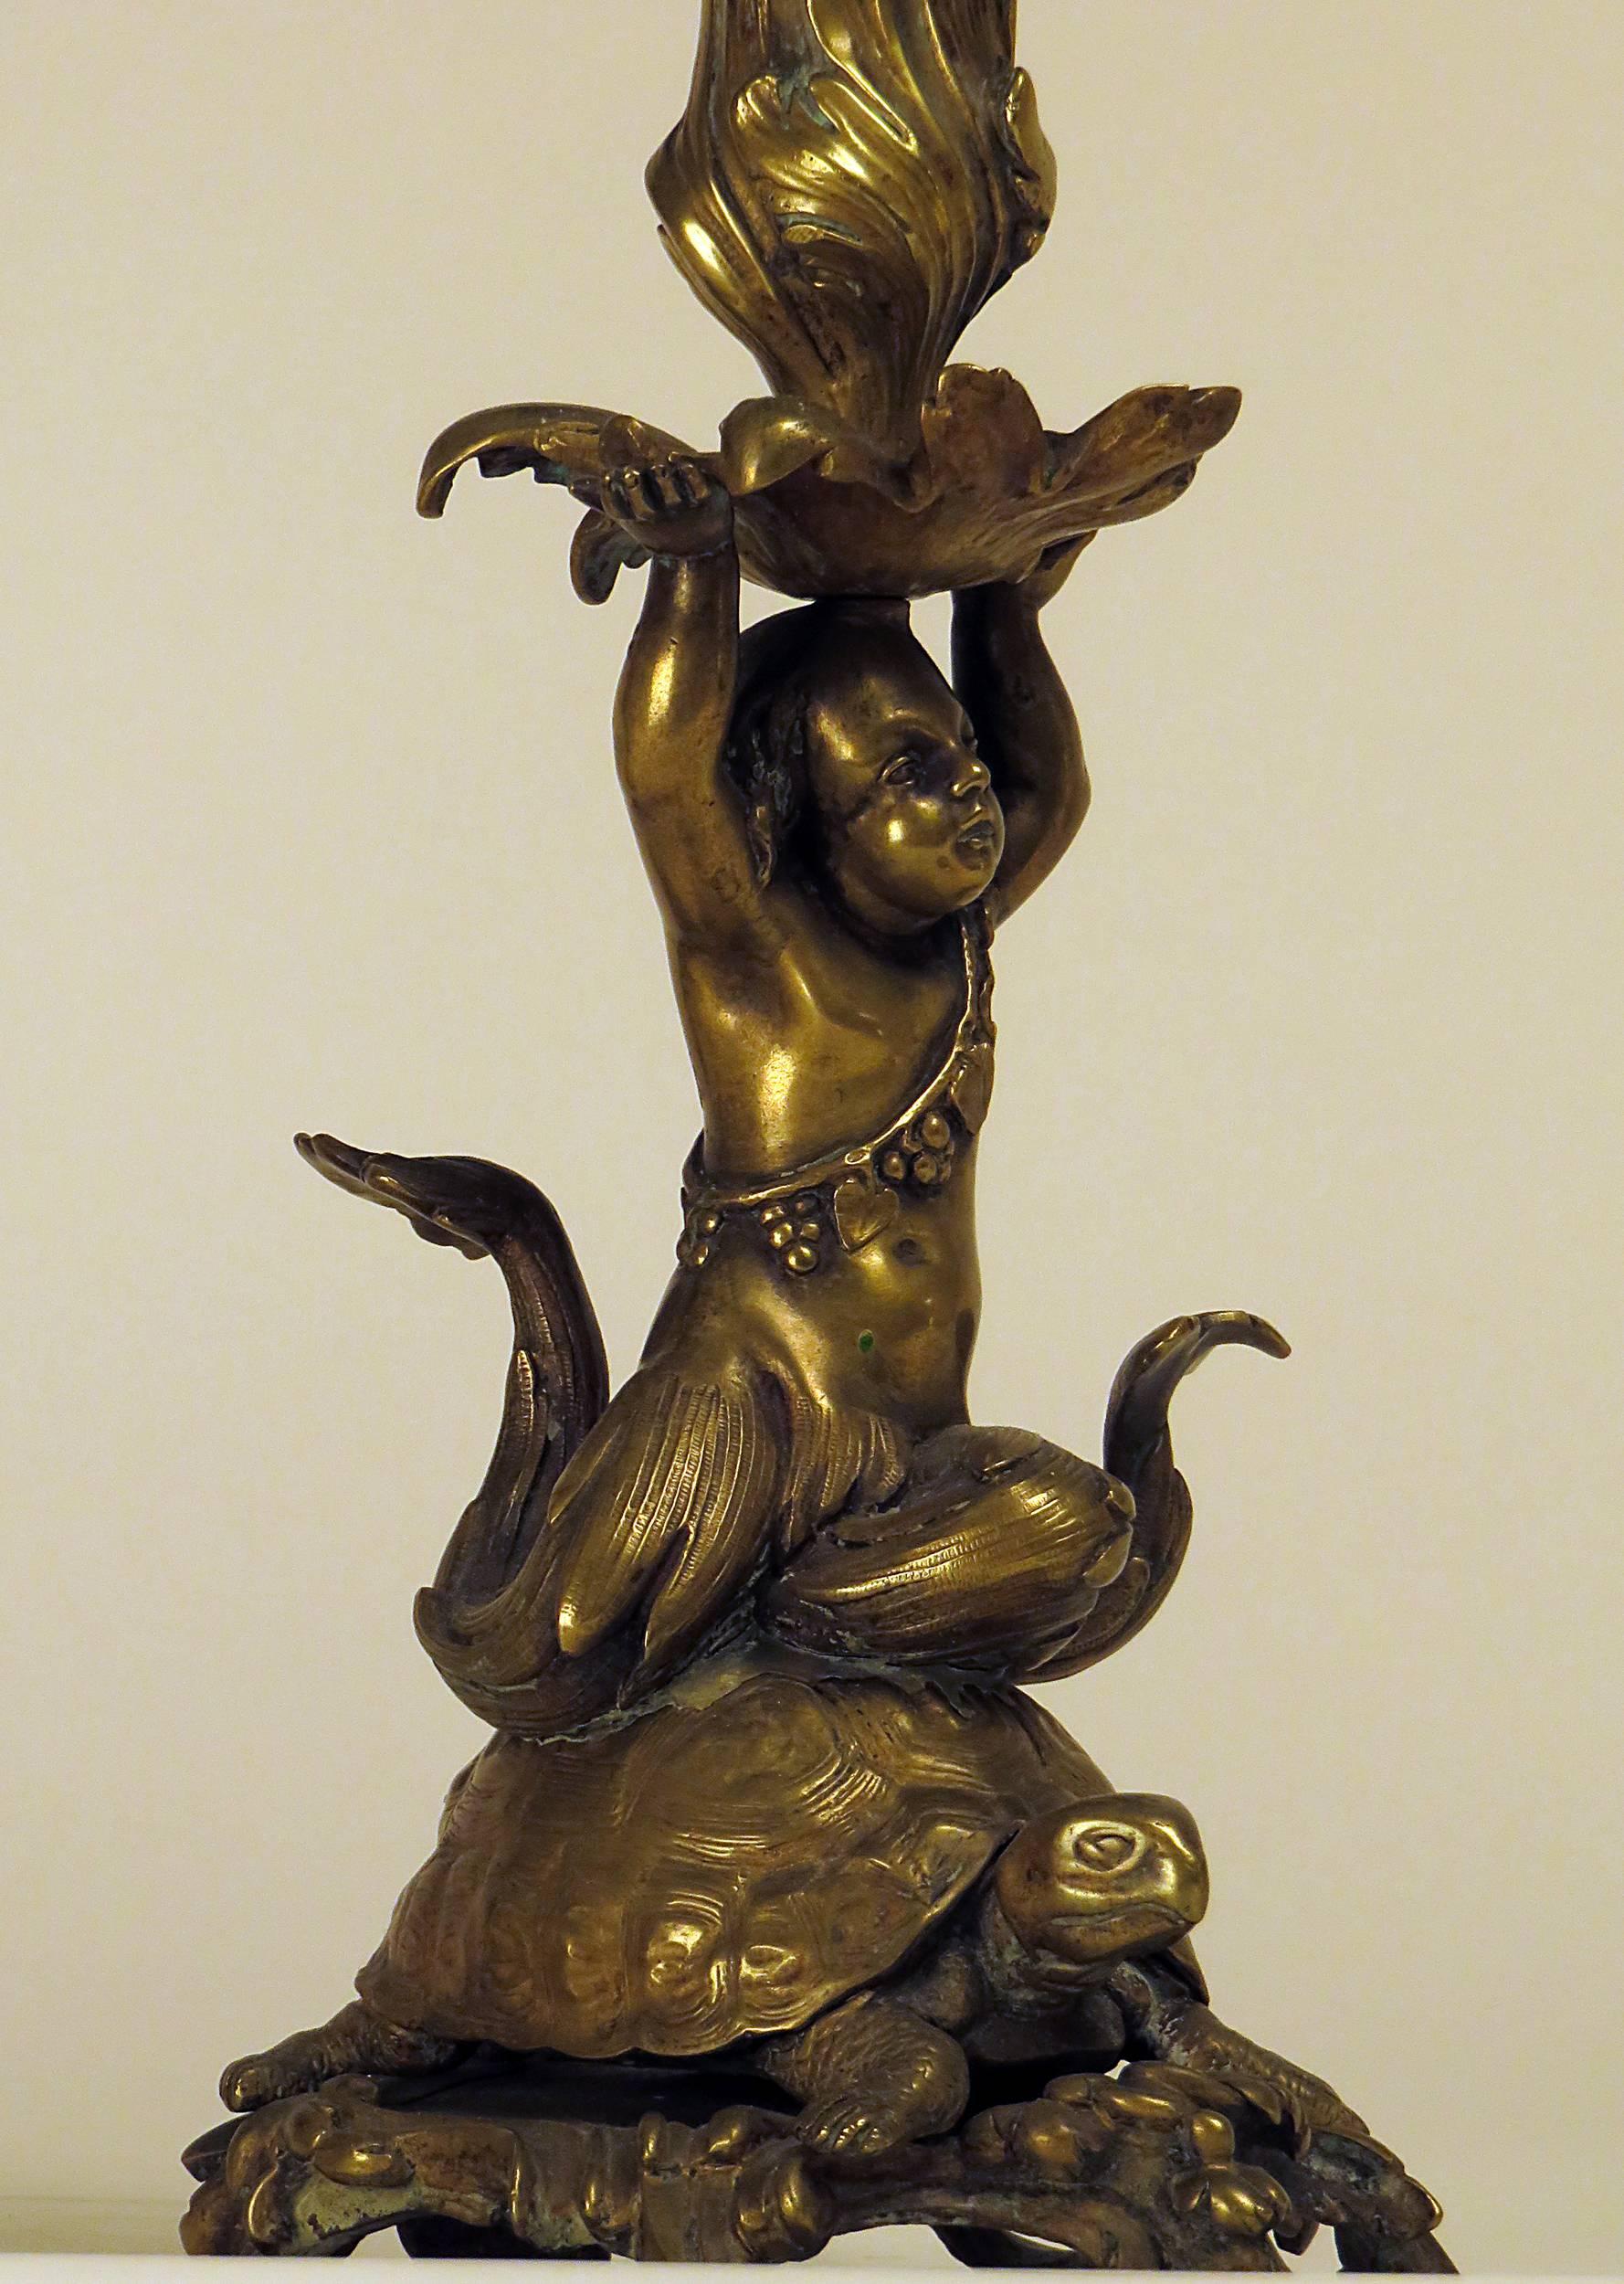 A wonderful large pair of bronze candle sticks cast as young sea nymphs riding a turtle on a scrolling weighted base. Raised arms support candle cup and bobeche. From a very good West coast collection assembled about 1900. The casting and sculpting